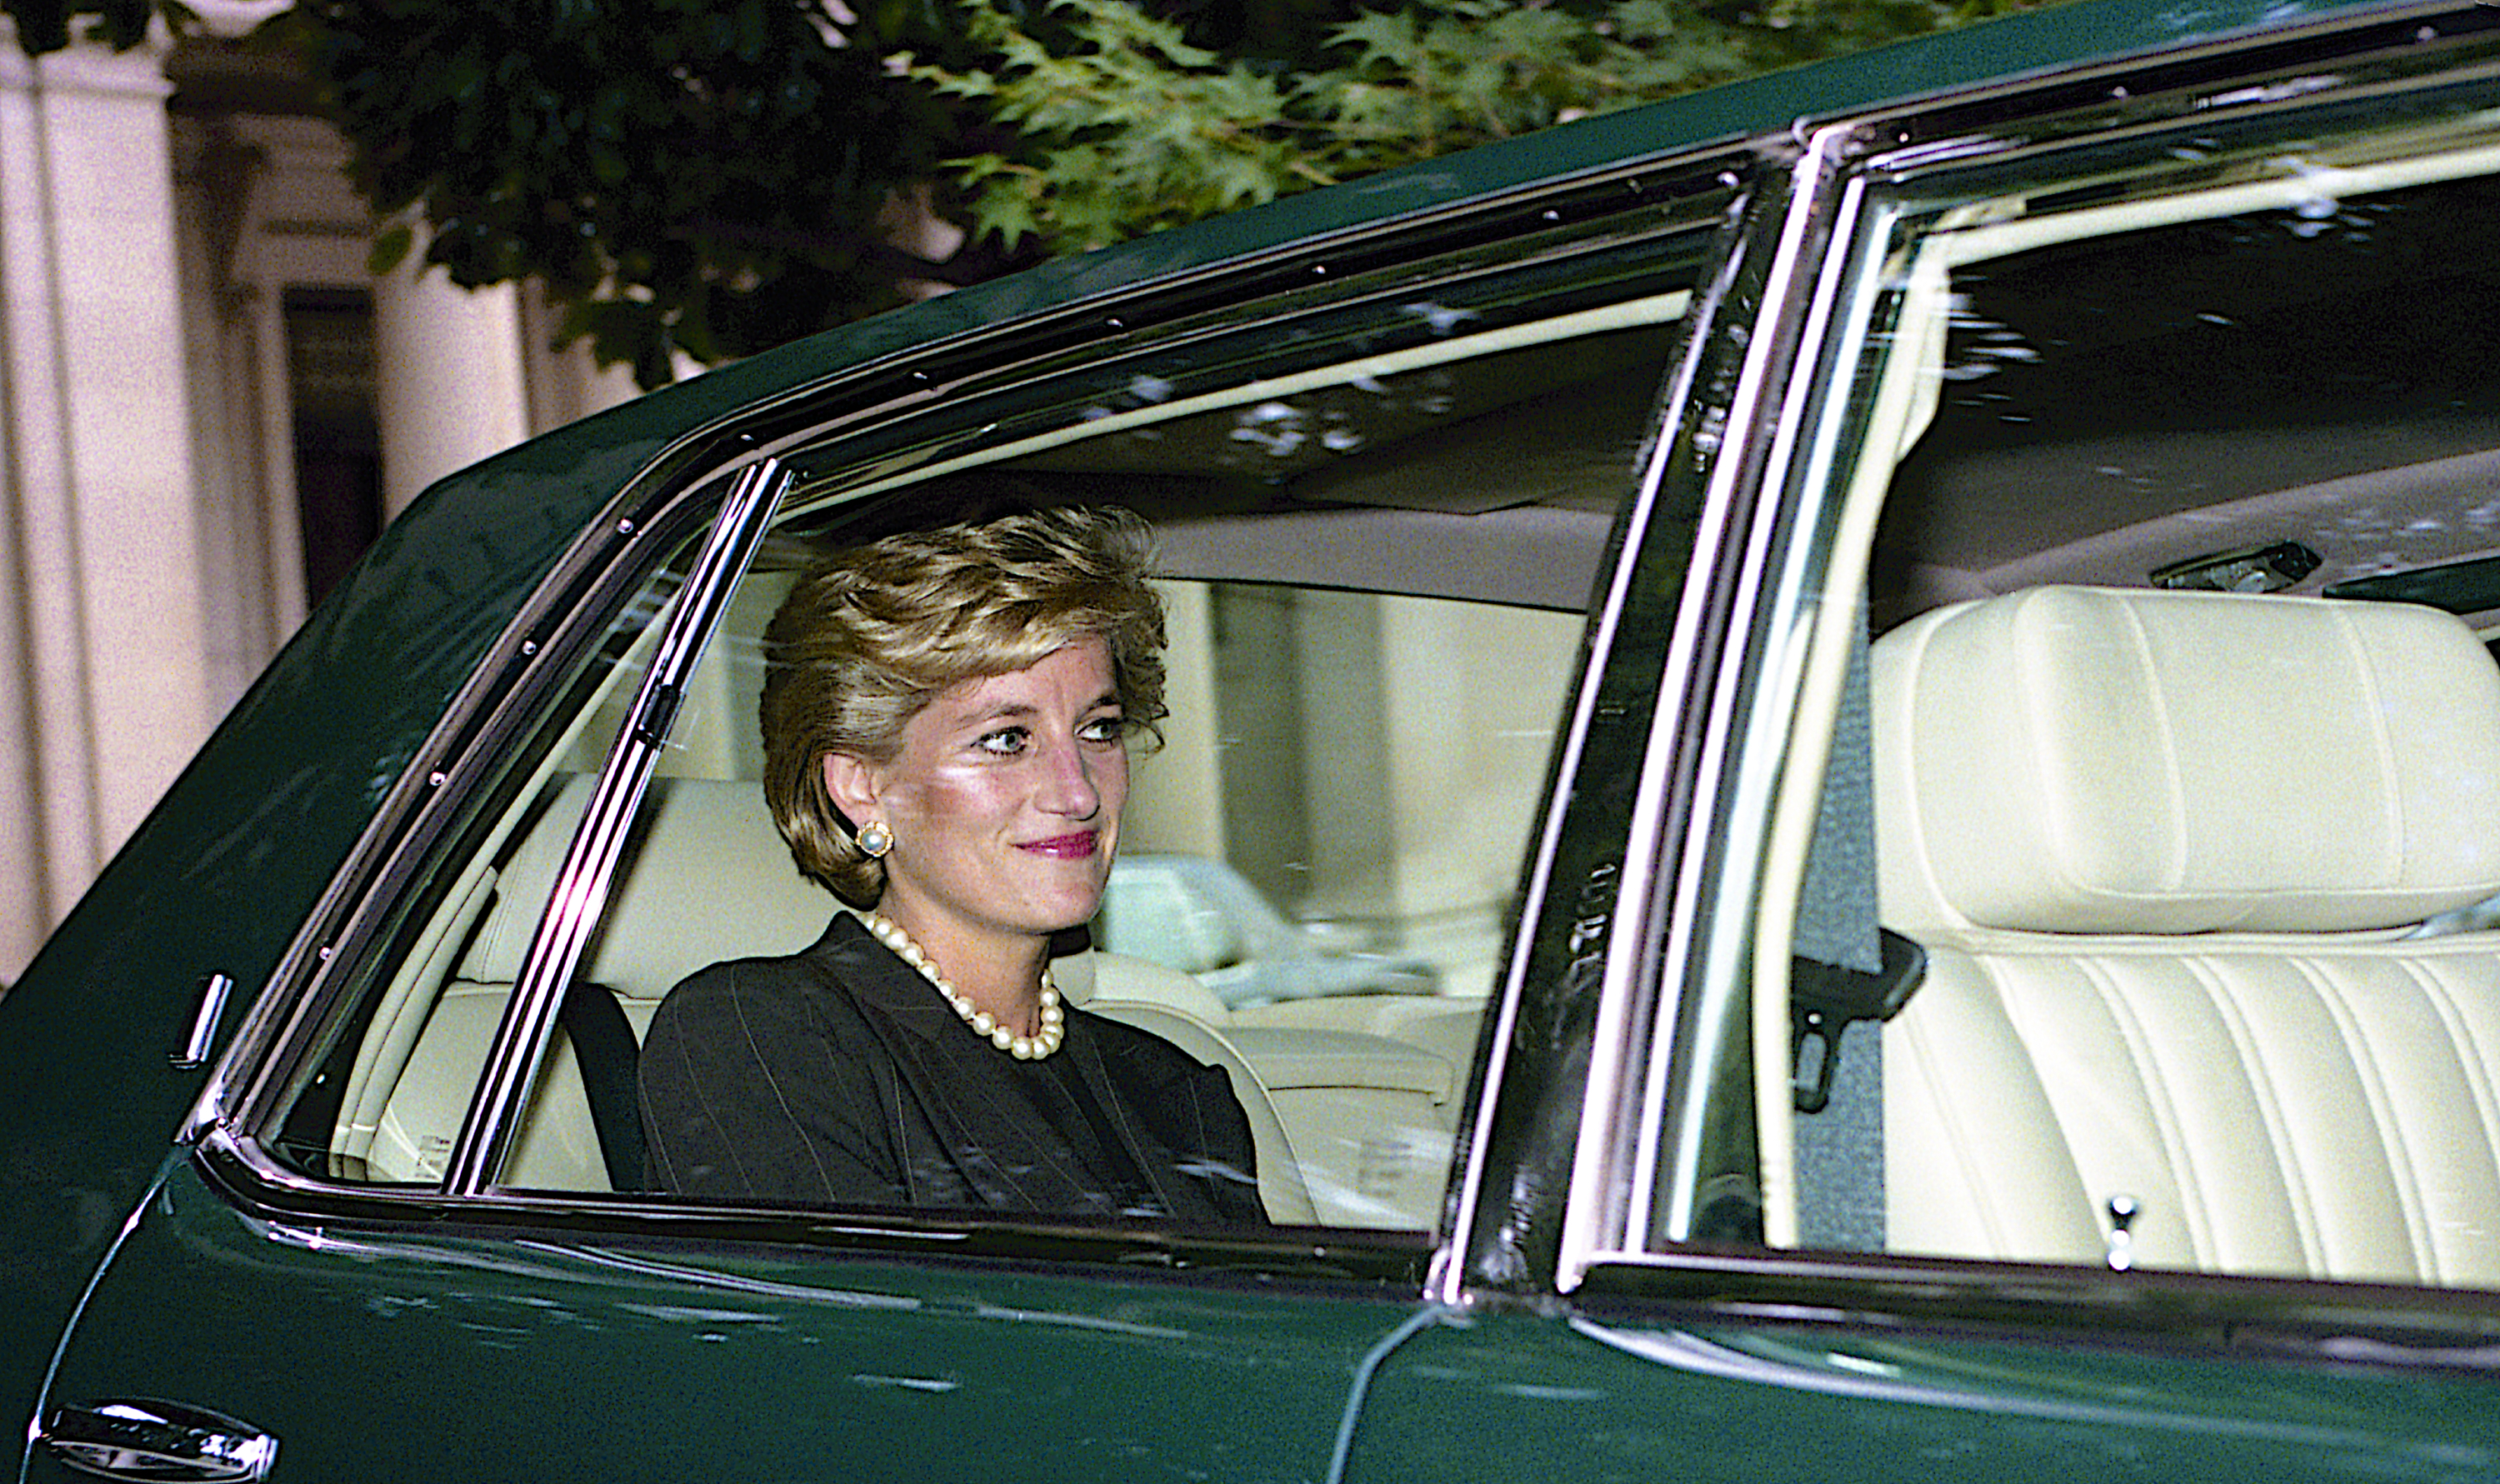 Diana, Princess of Wales, in Washington DC in September 1996.